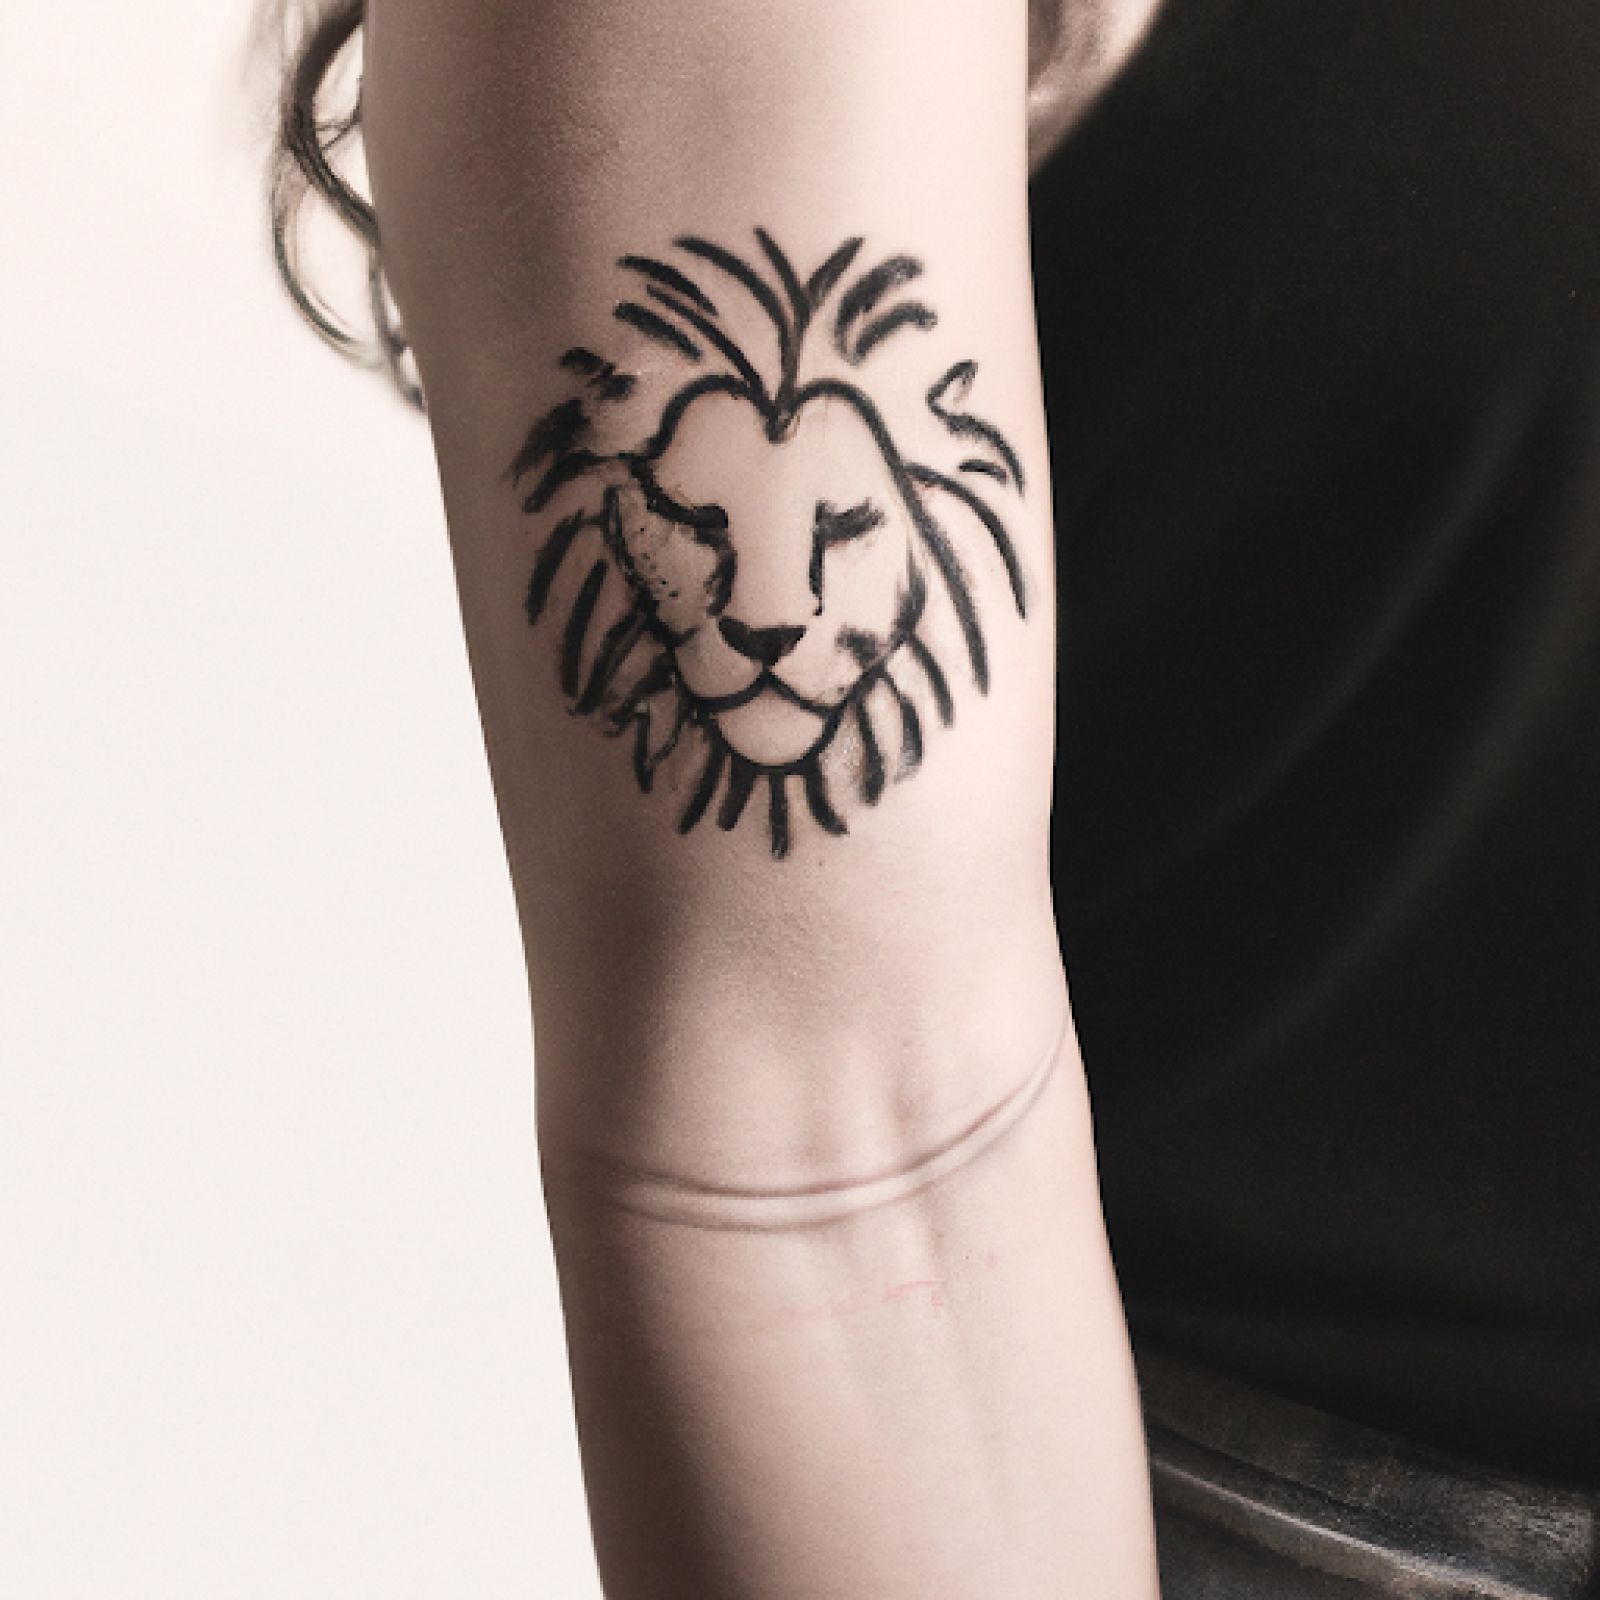 Lion tattoo on arm for women